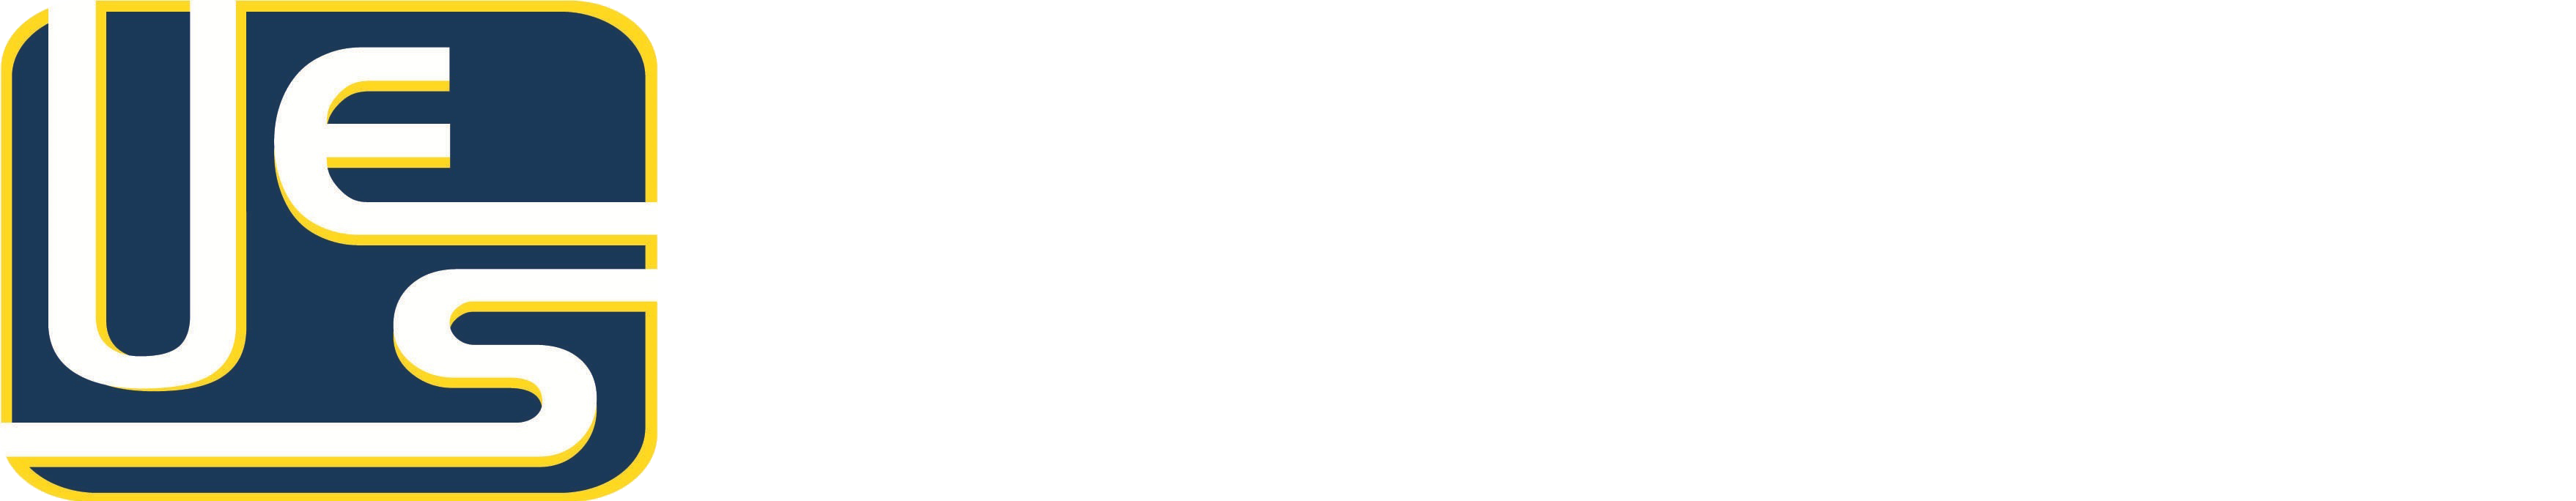 Universal Electrical Service, Inc.